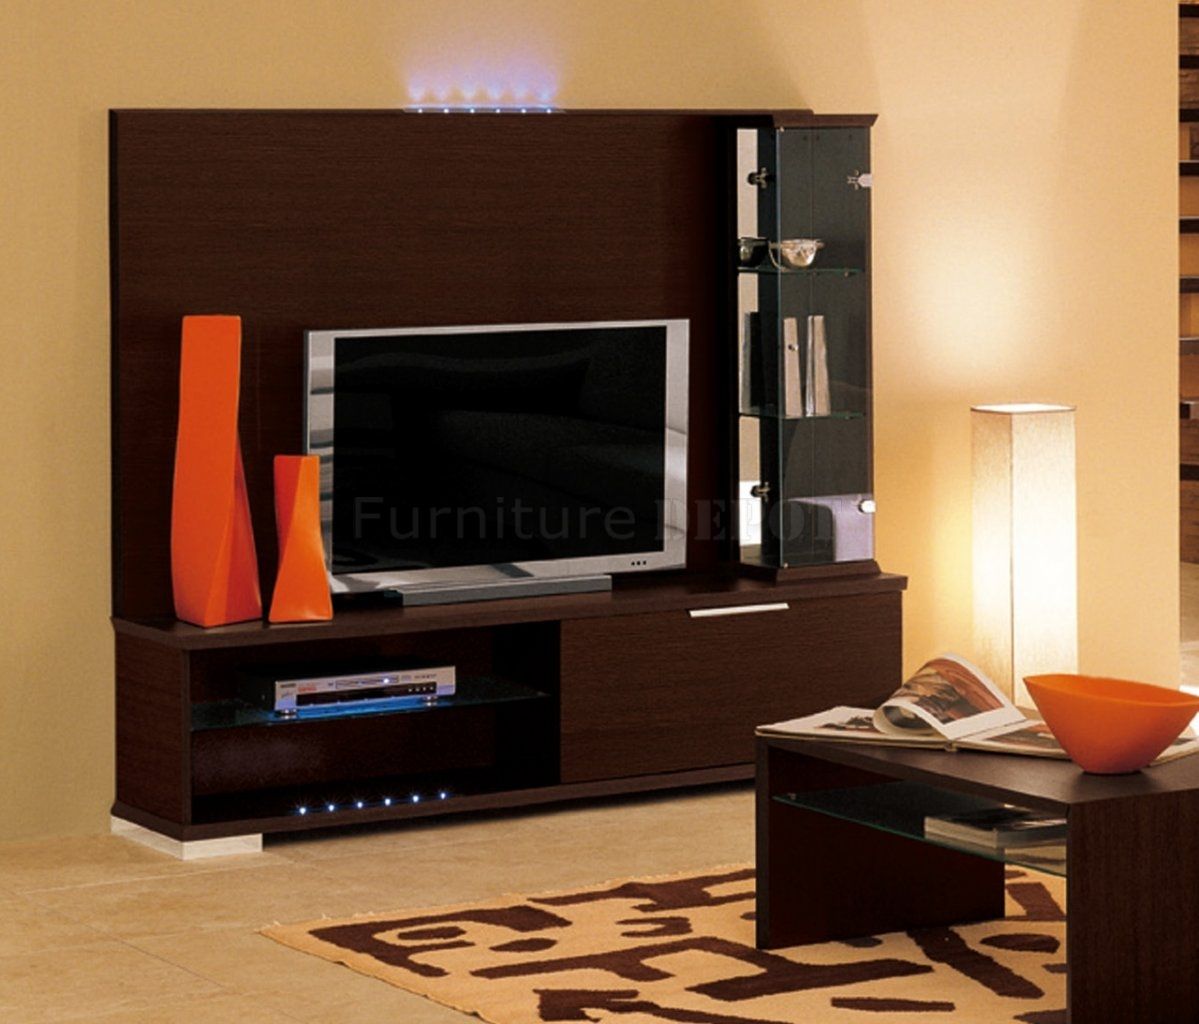 Design A Wall Unit Intended For Modern Tv Wall Units (View 15 of 15)